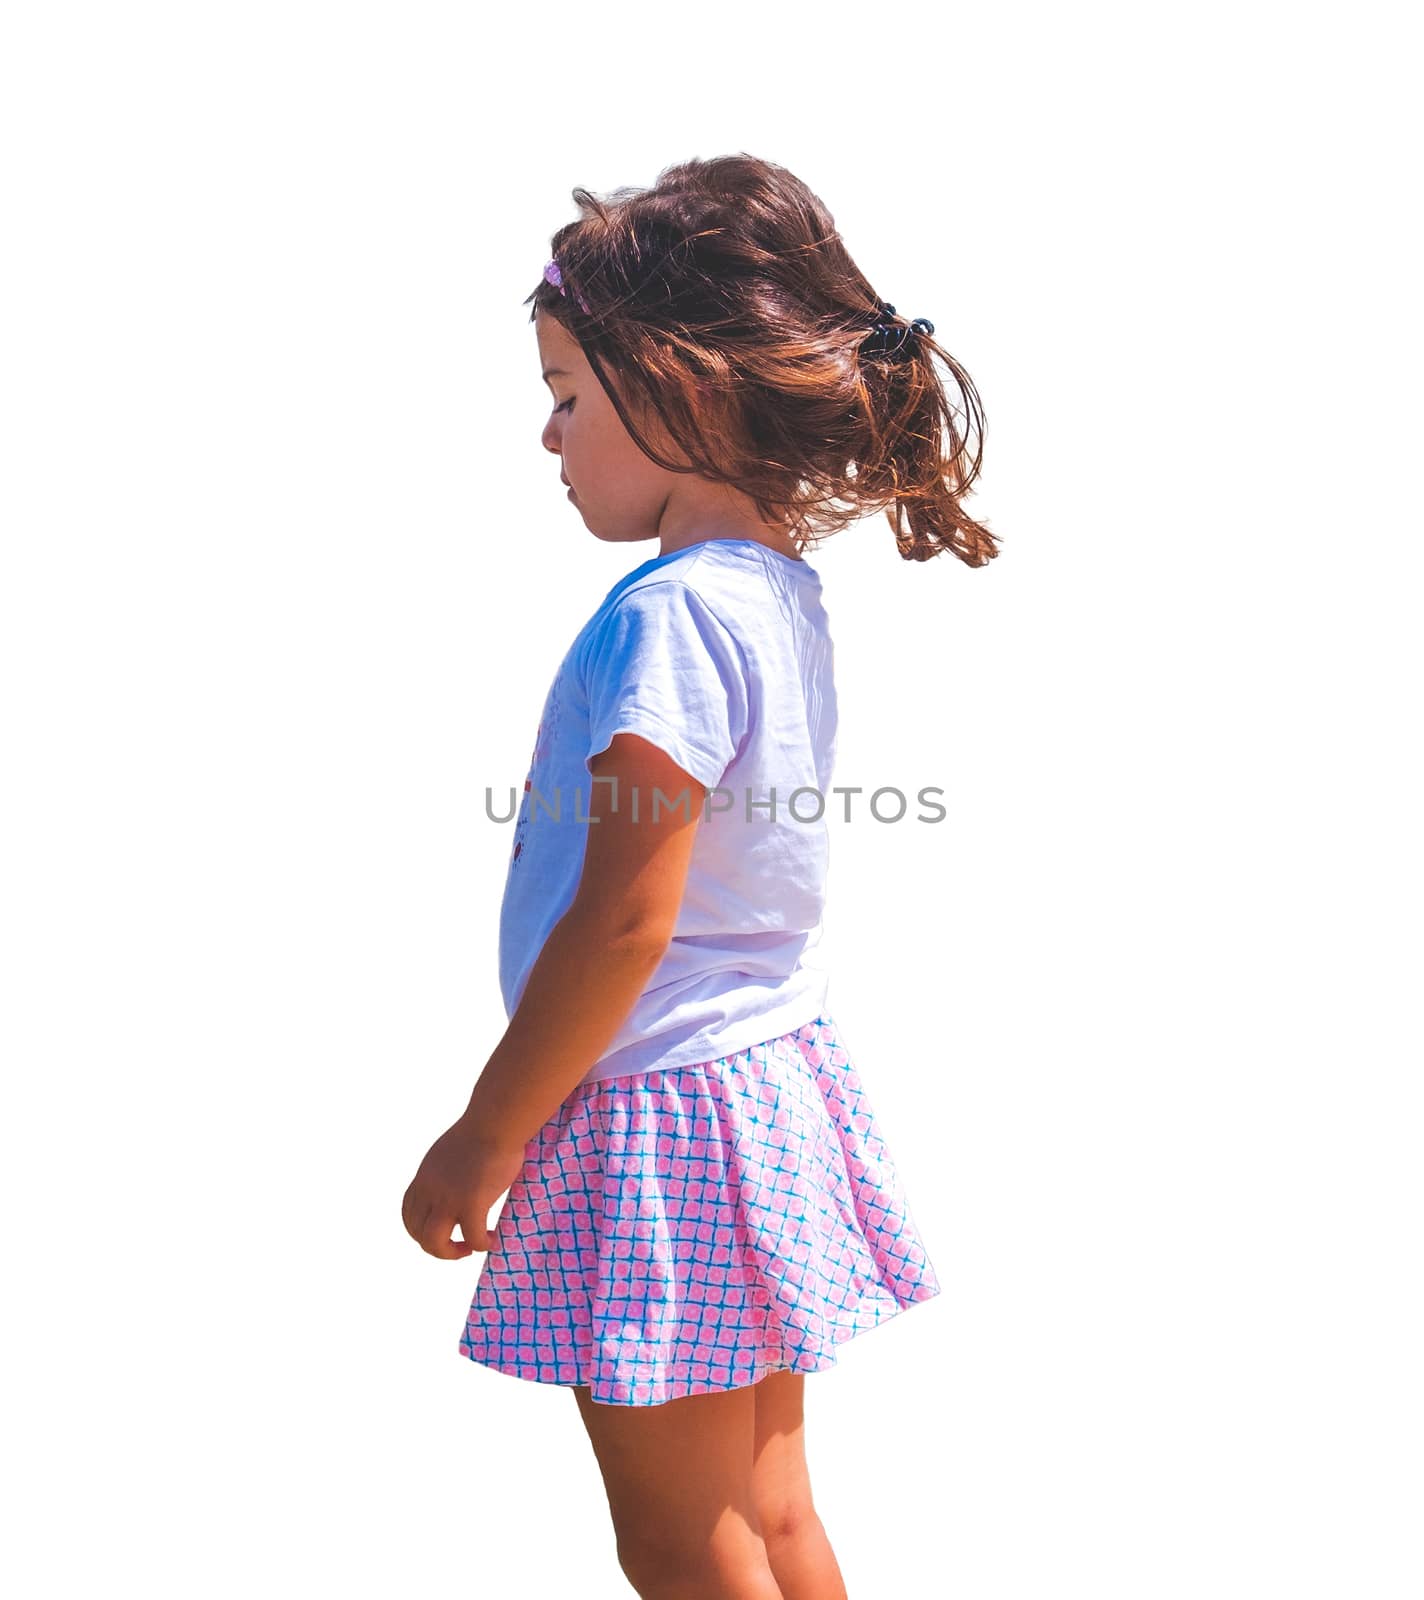 sad children emotion isolated side view female baby girl background by LucaLorenzelli